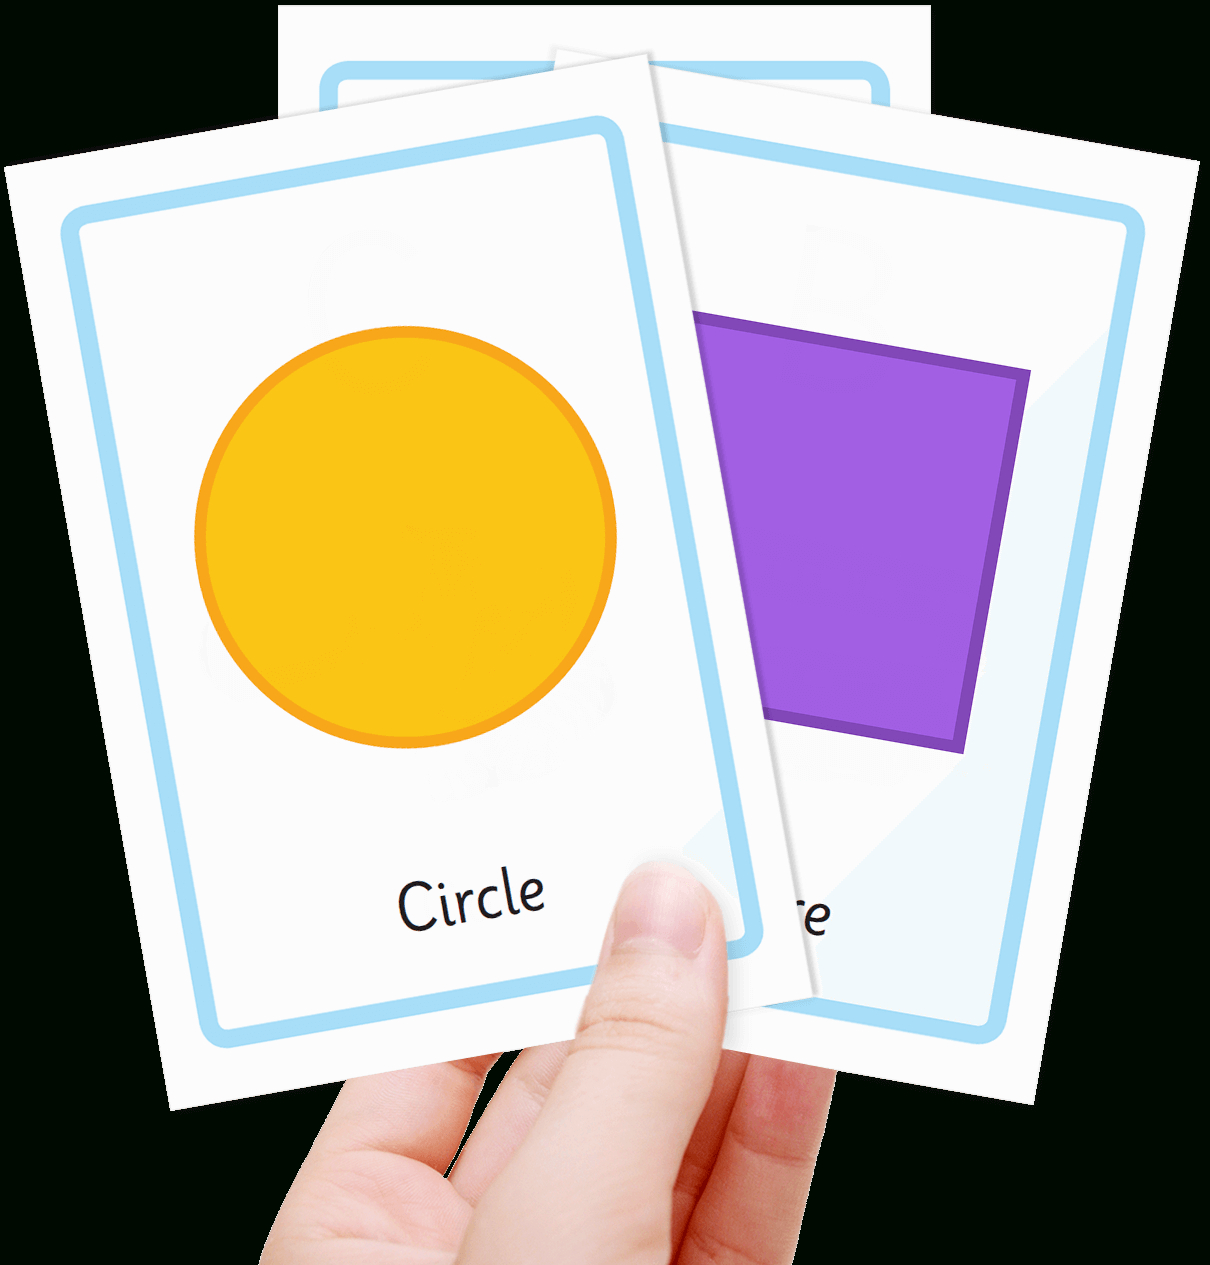 Free Shape Flashcards For Kids - Totcards - Free Printable Flash Cards